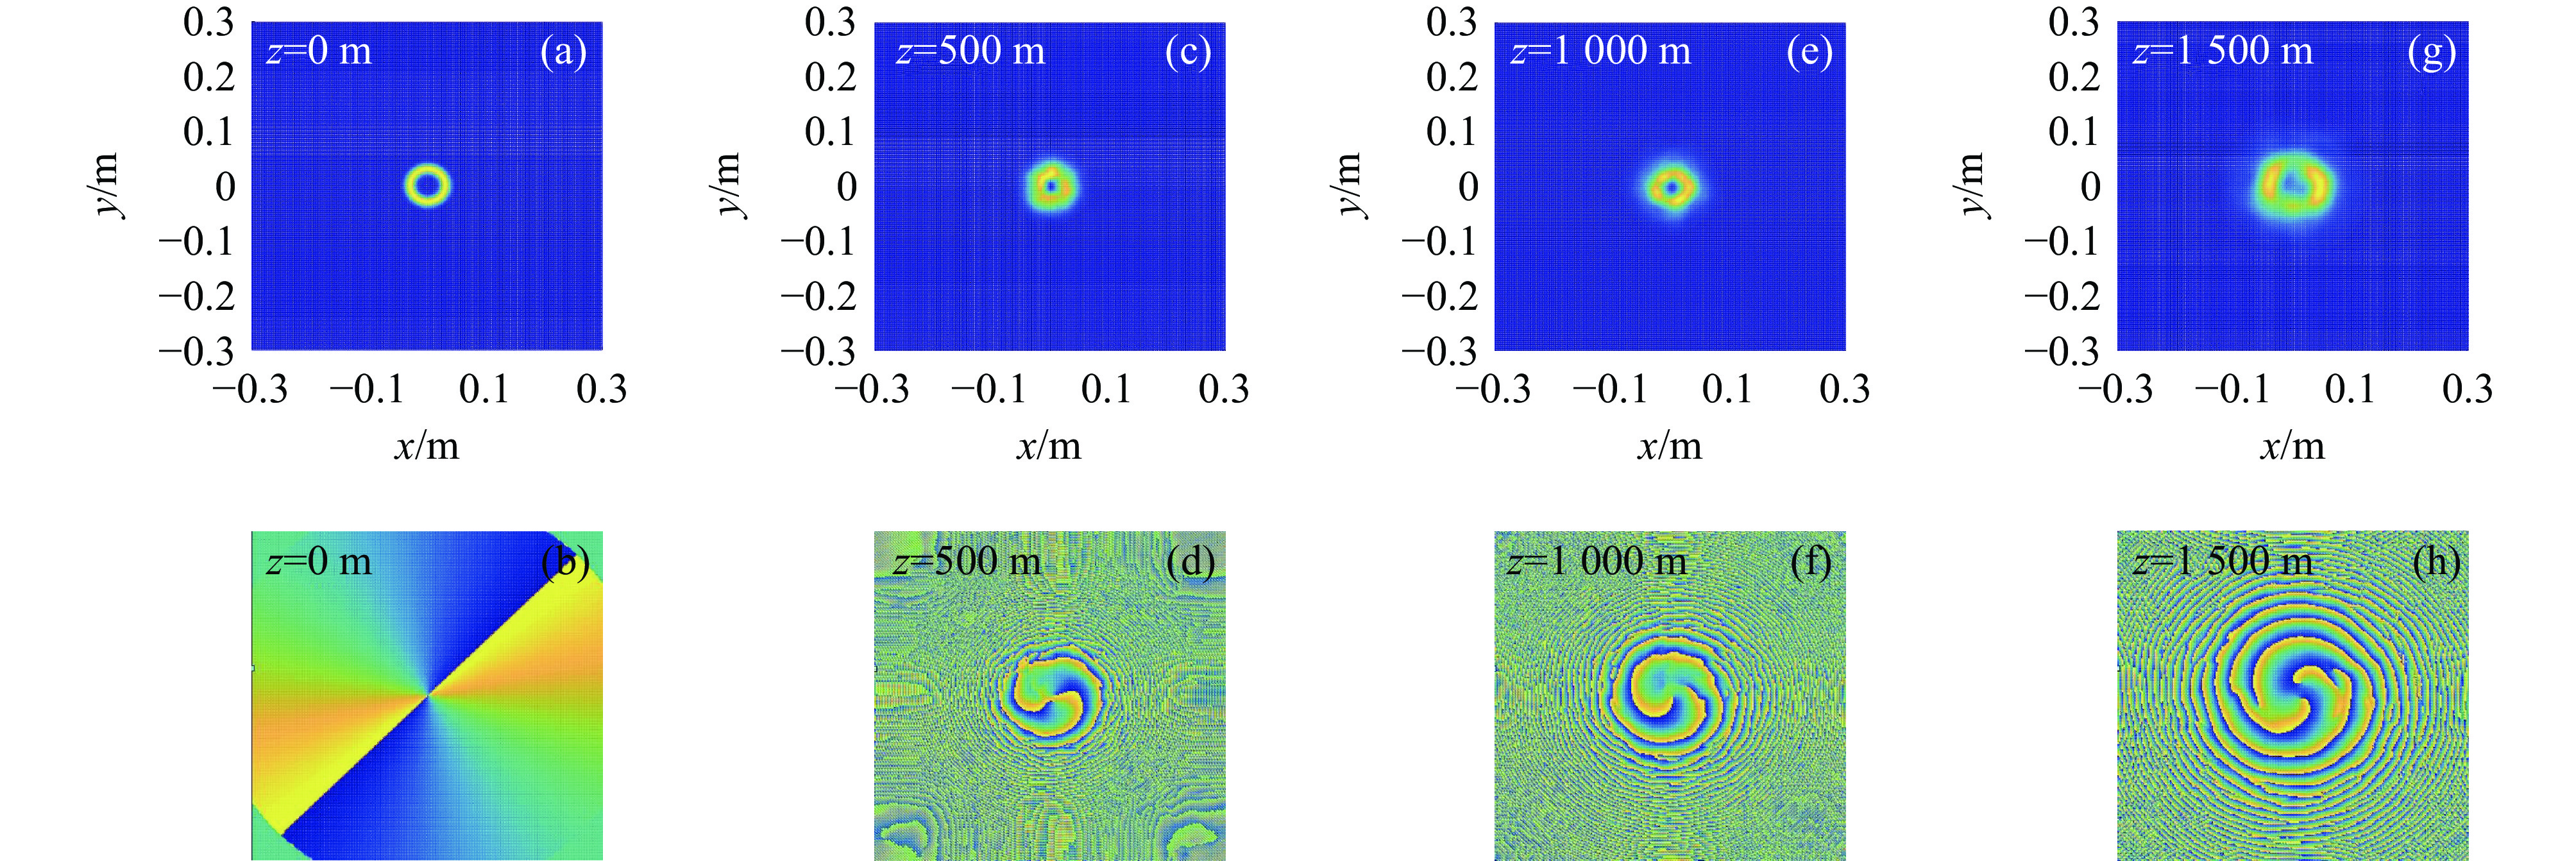 Two-dimensional intensity and phase distribution of POV beams with different transmission distances under atmospheric turbulence